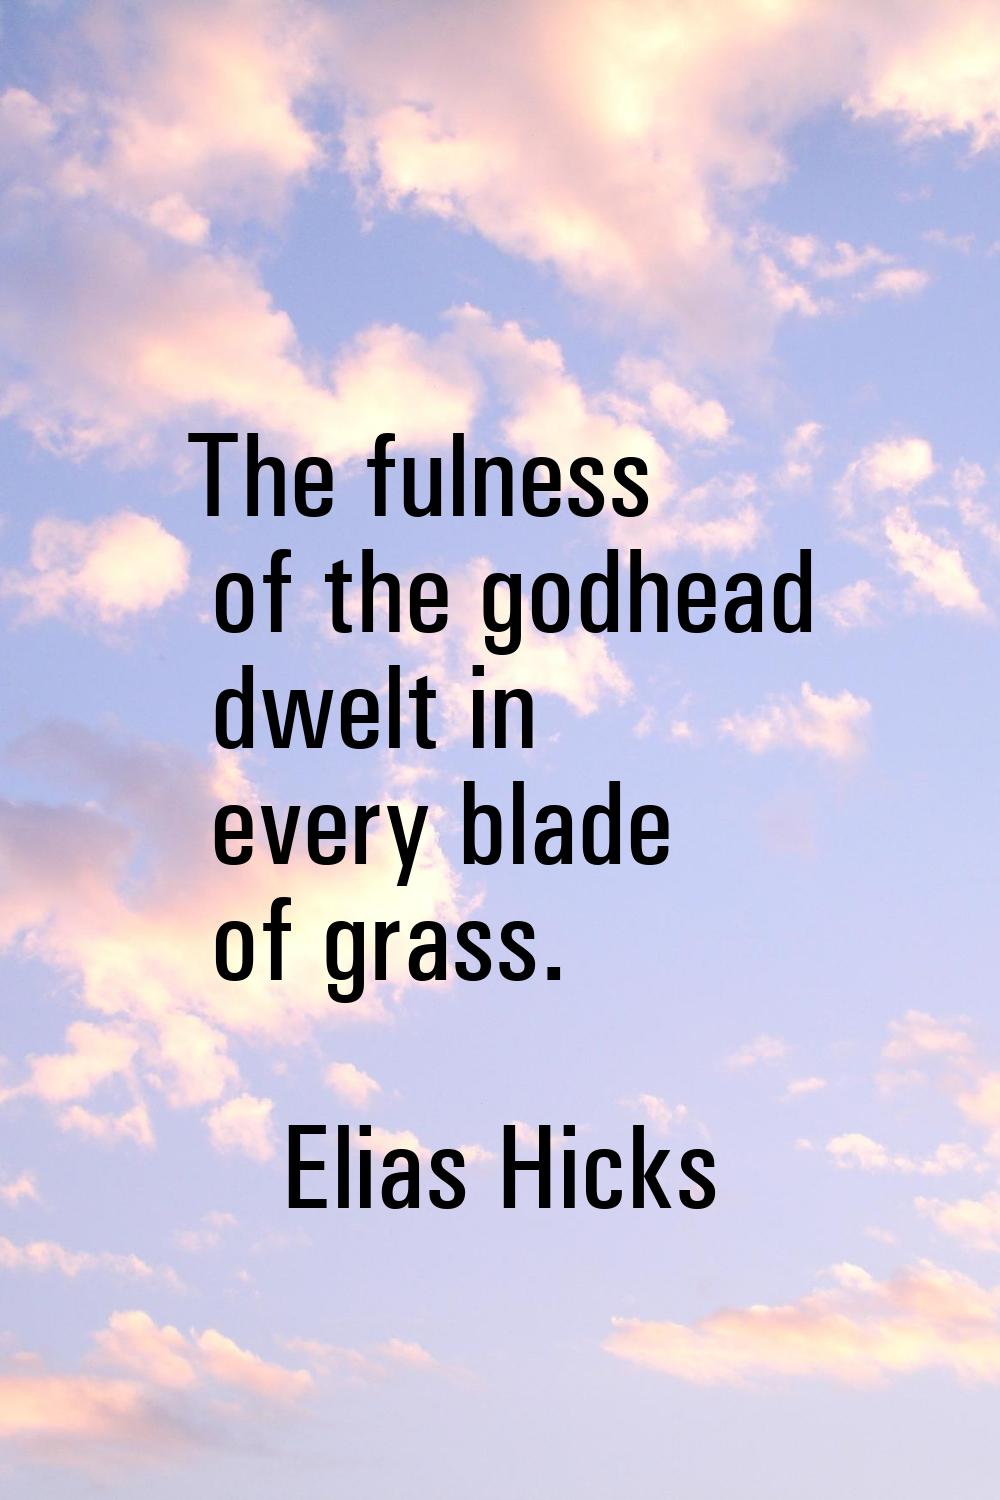 The fulness of the godhead dwelt in every blade of grass.